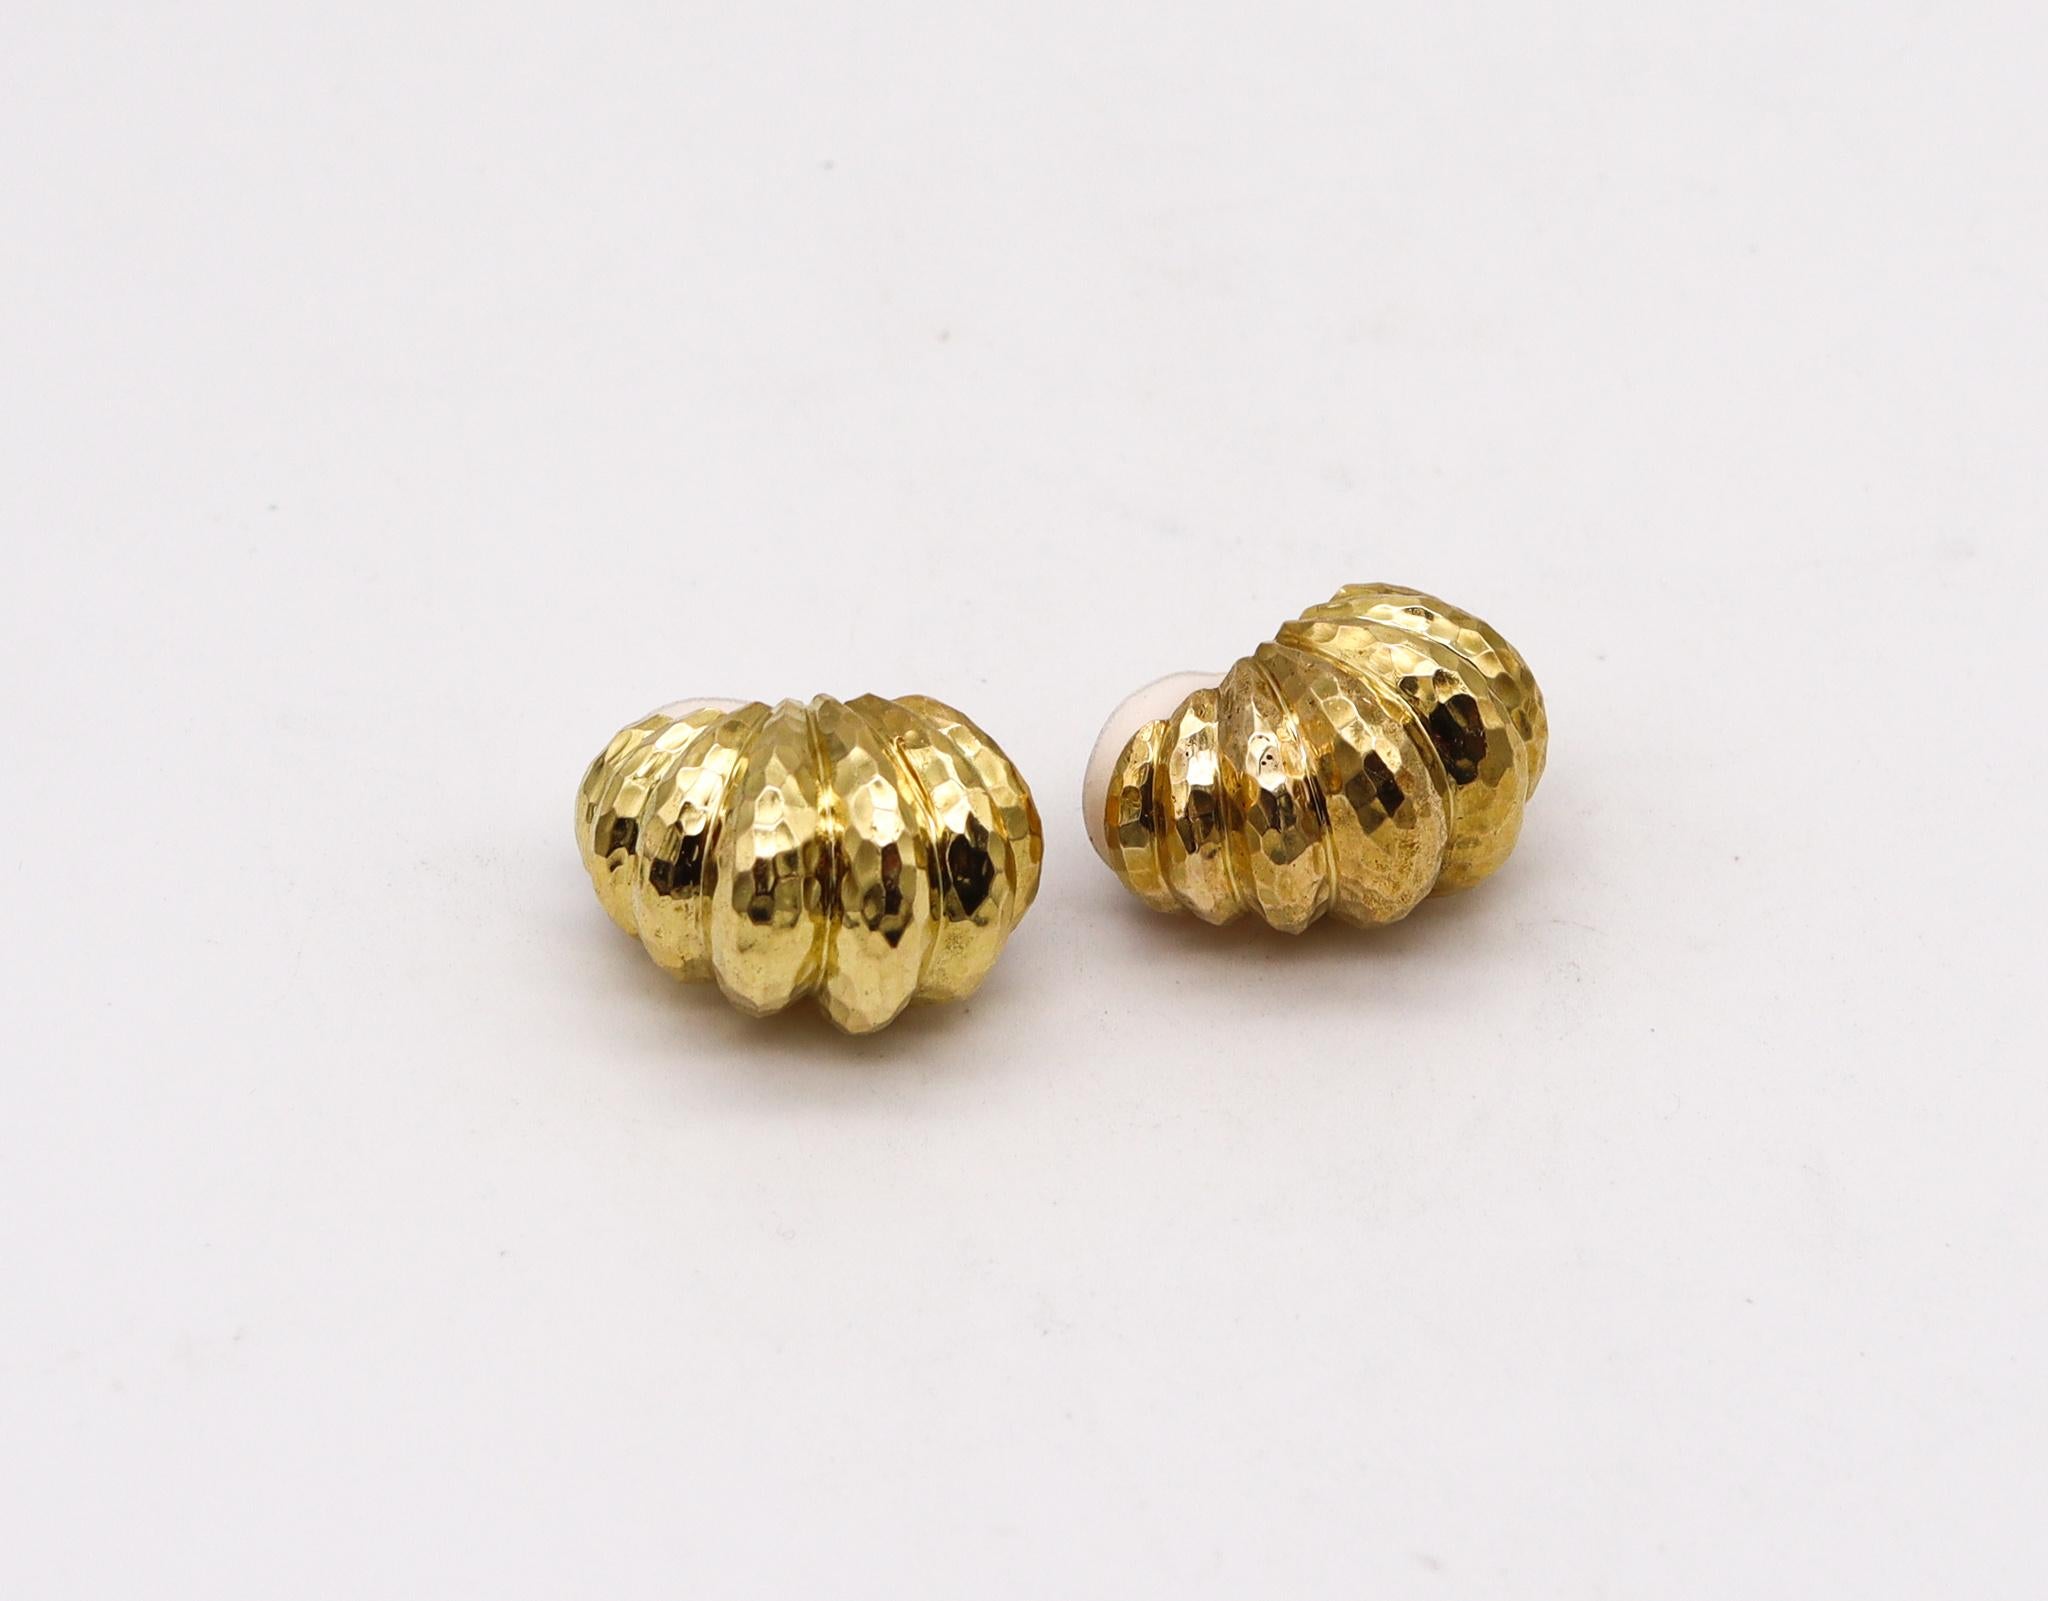 Pair of fluted clips earrings designed by David Webb (1925-1975).

A vintage fluted pair, created in New York city at the atelier of David Webb, back in the 1970's. These pair of clip-On earrings was crafted in solid rich yellow gold of 18 karats,